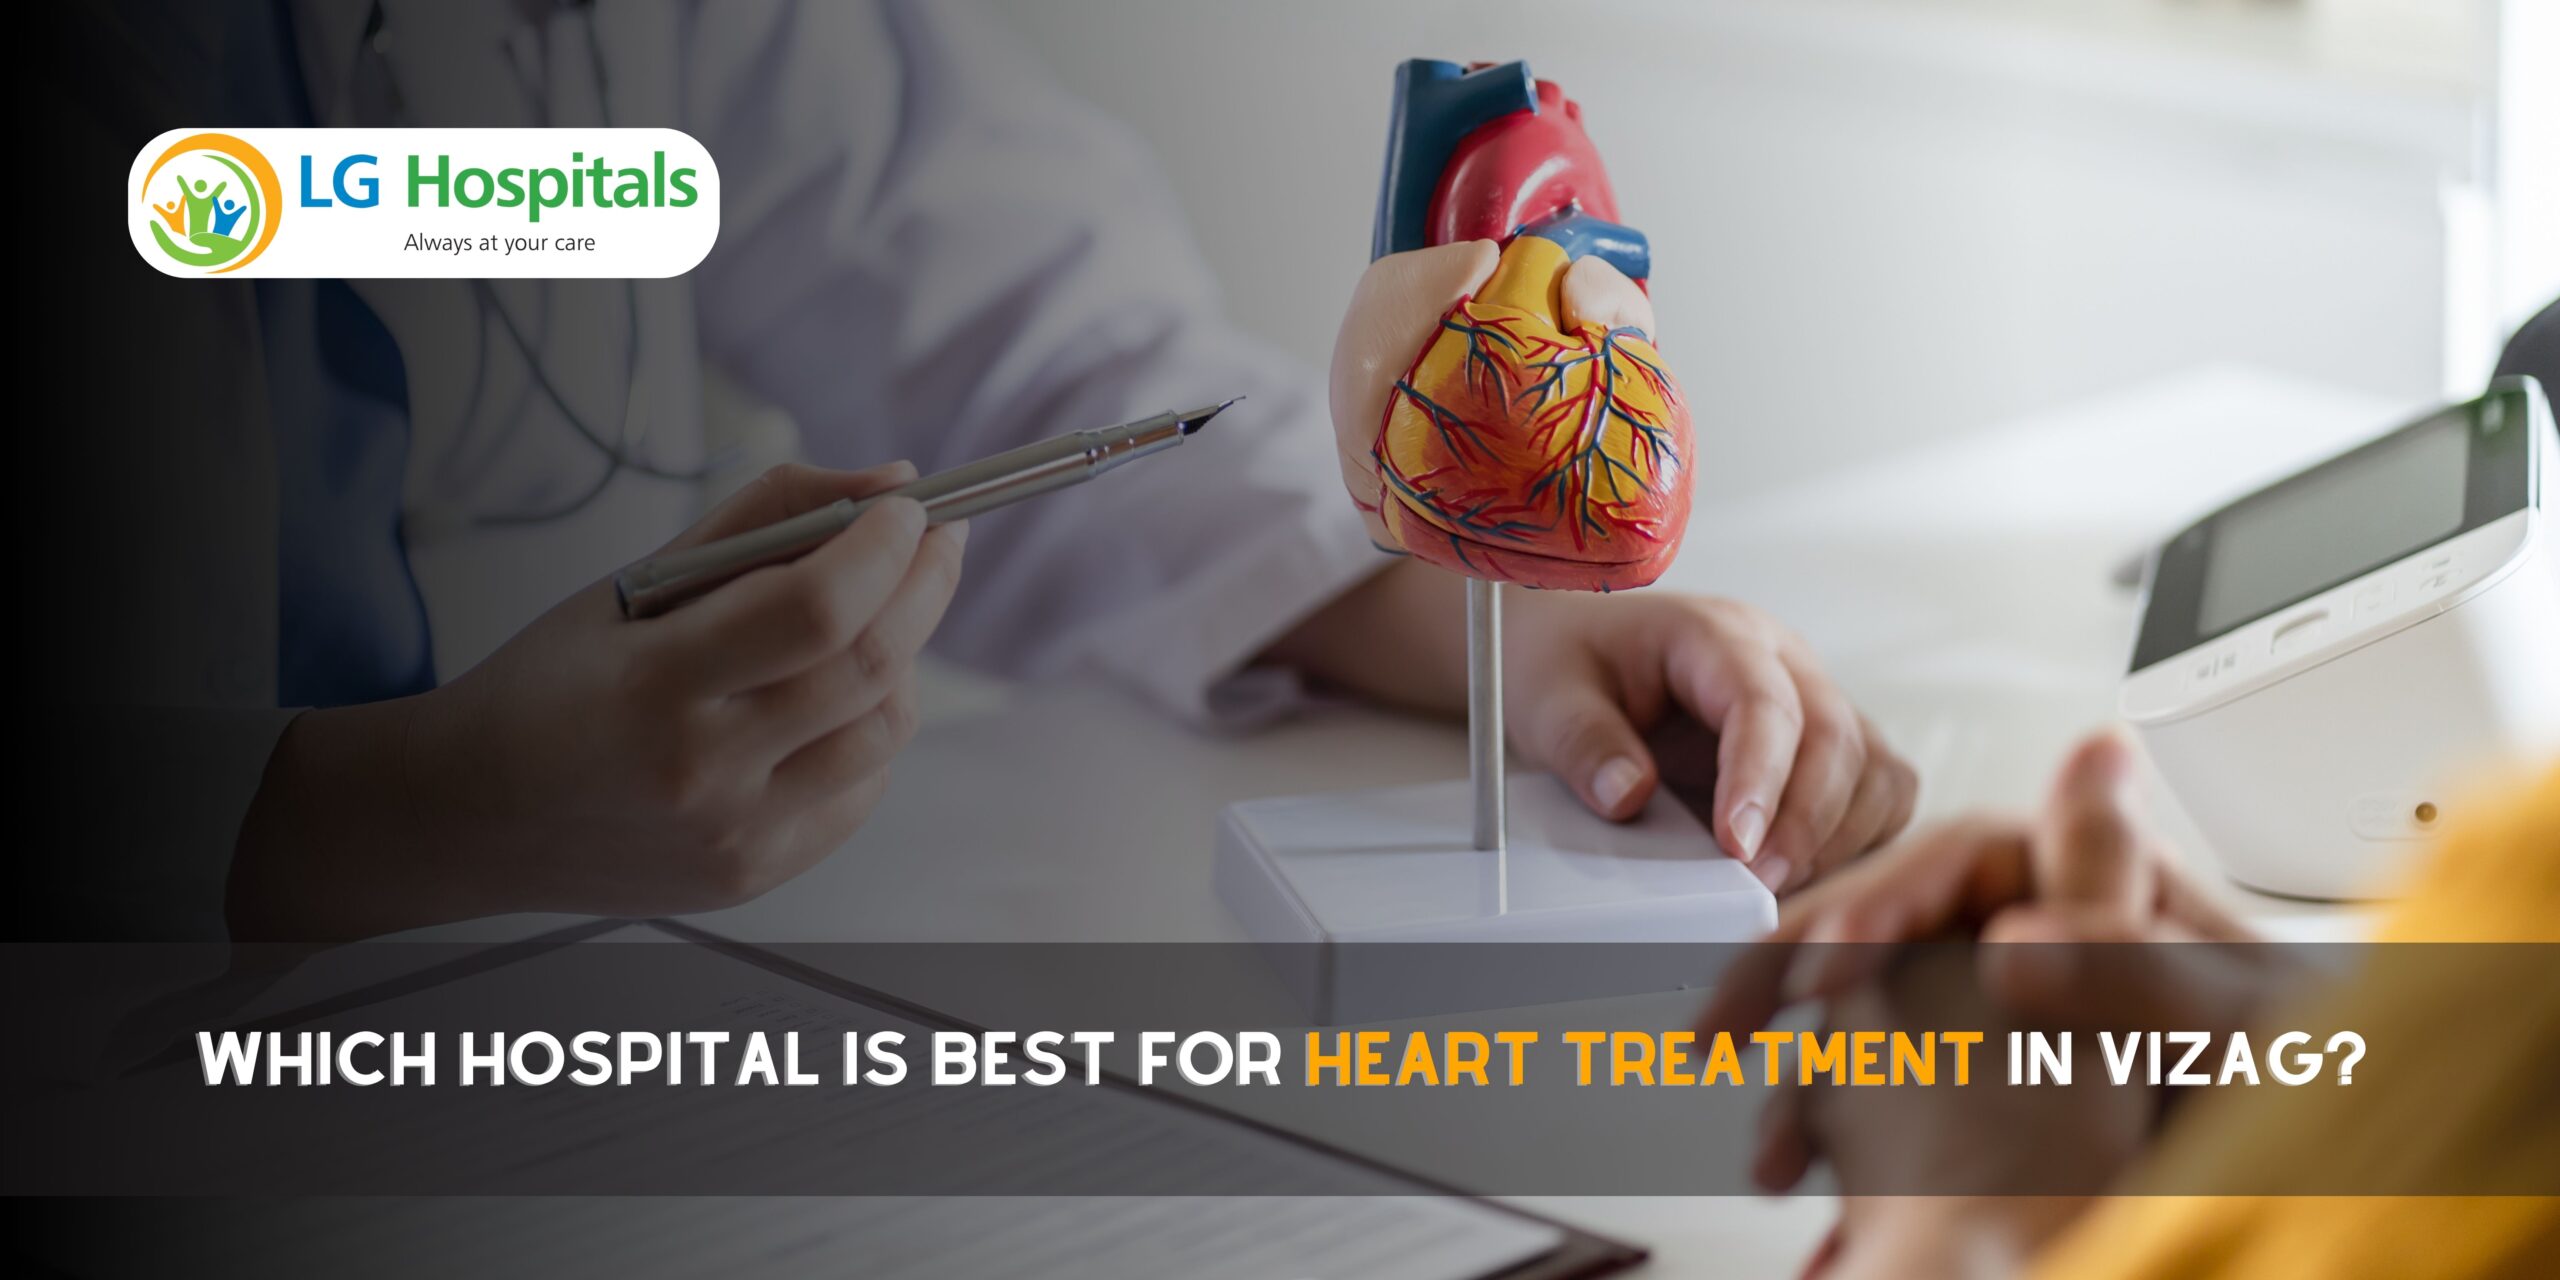 Which hospital is best for heart treatment?